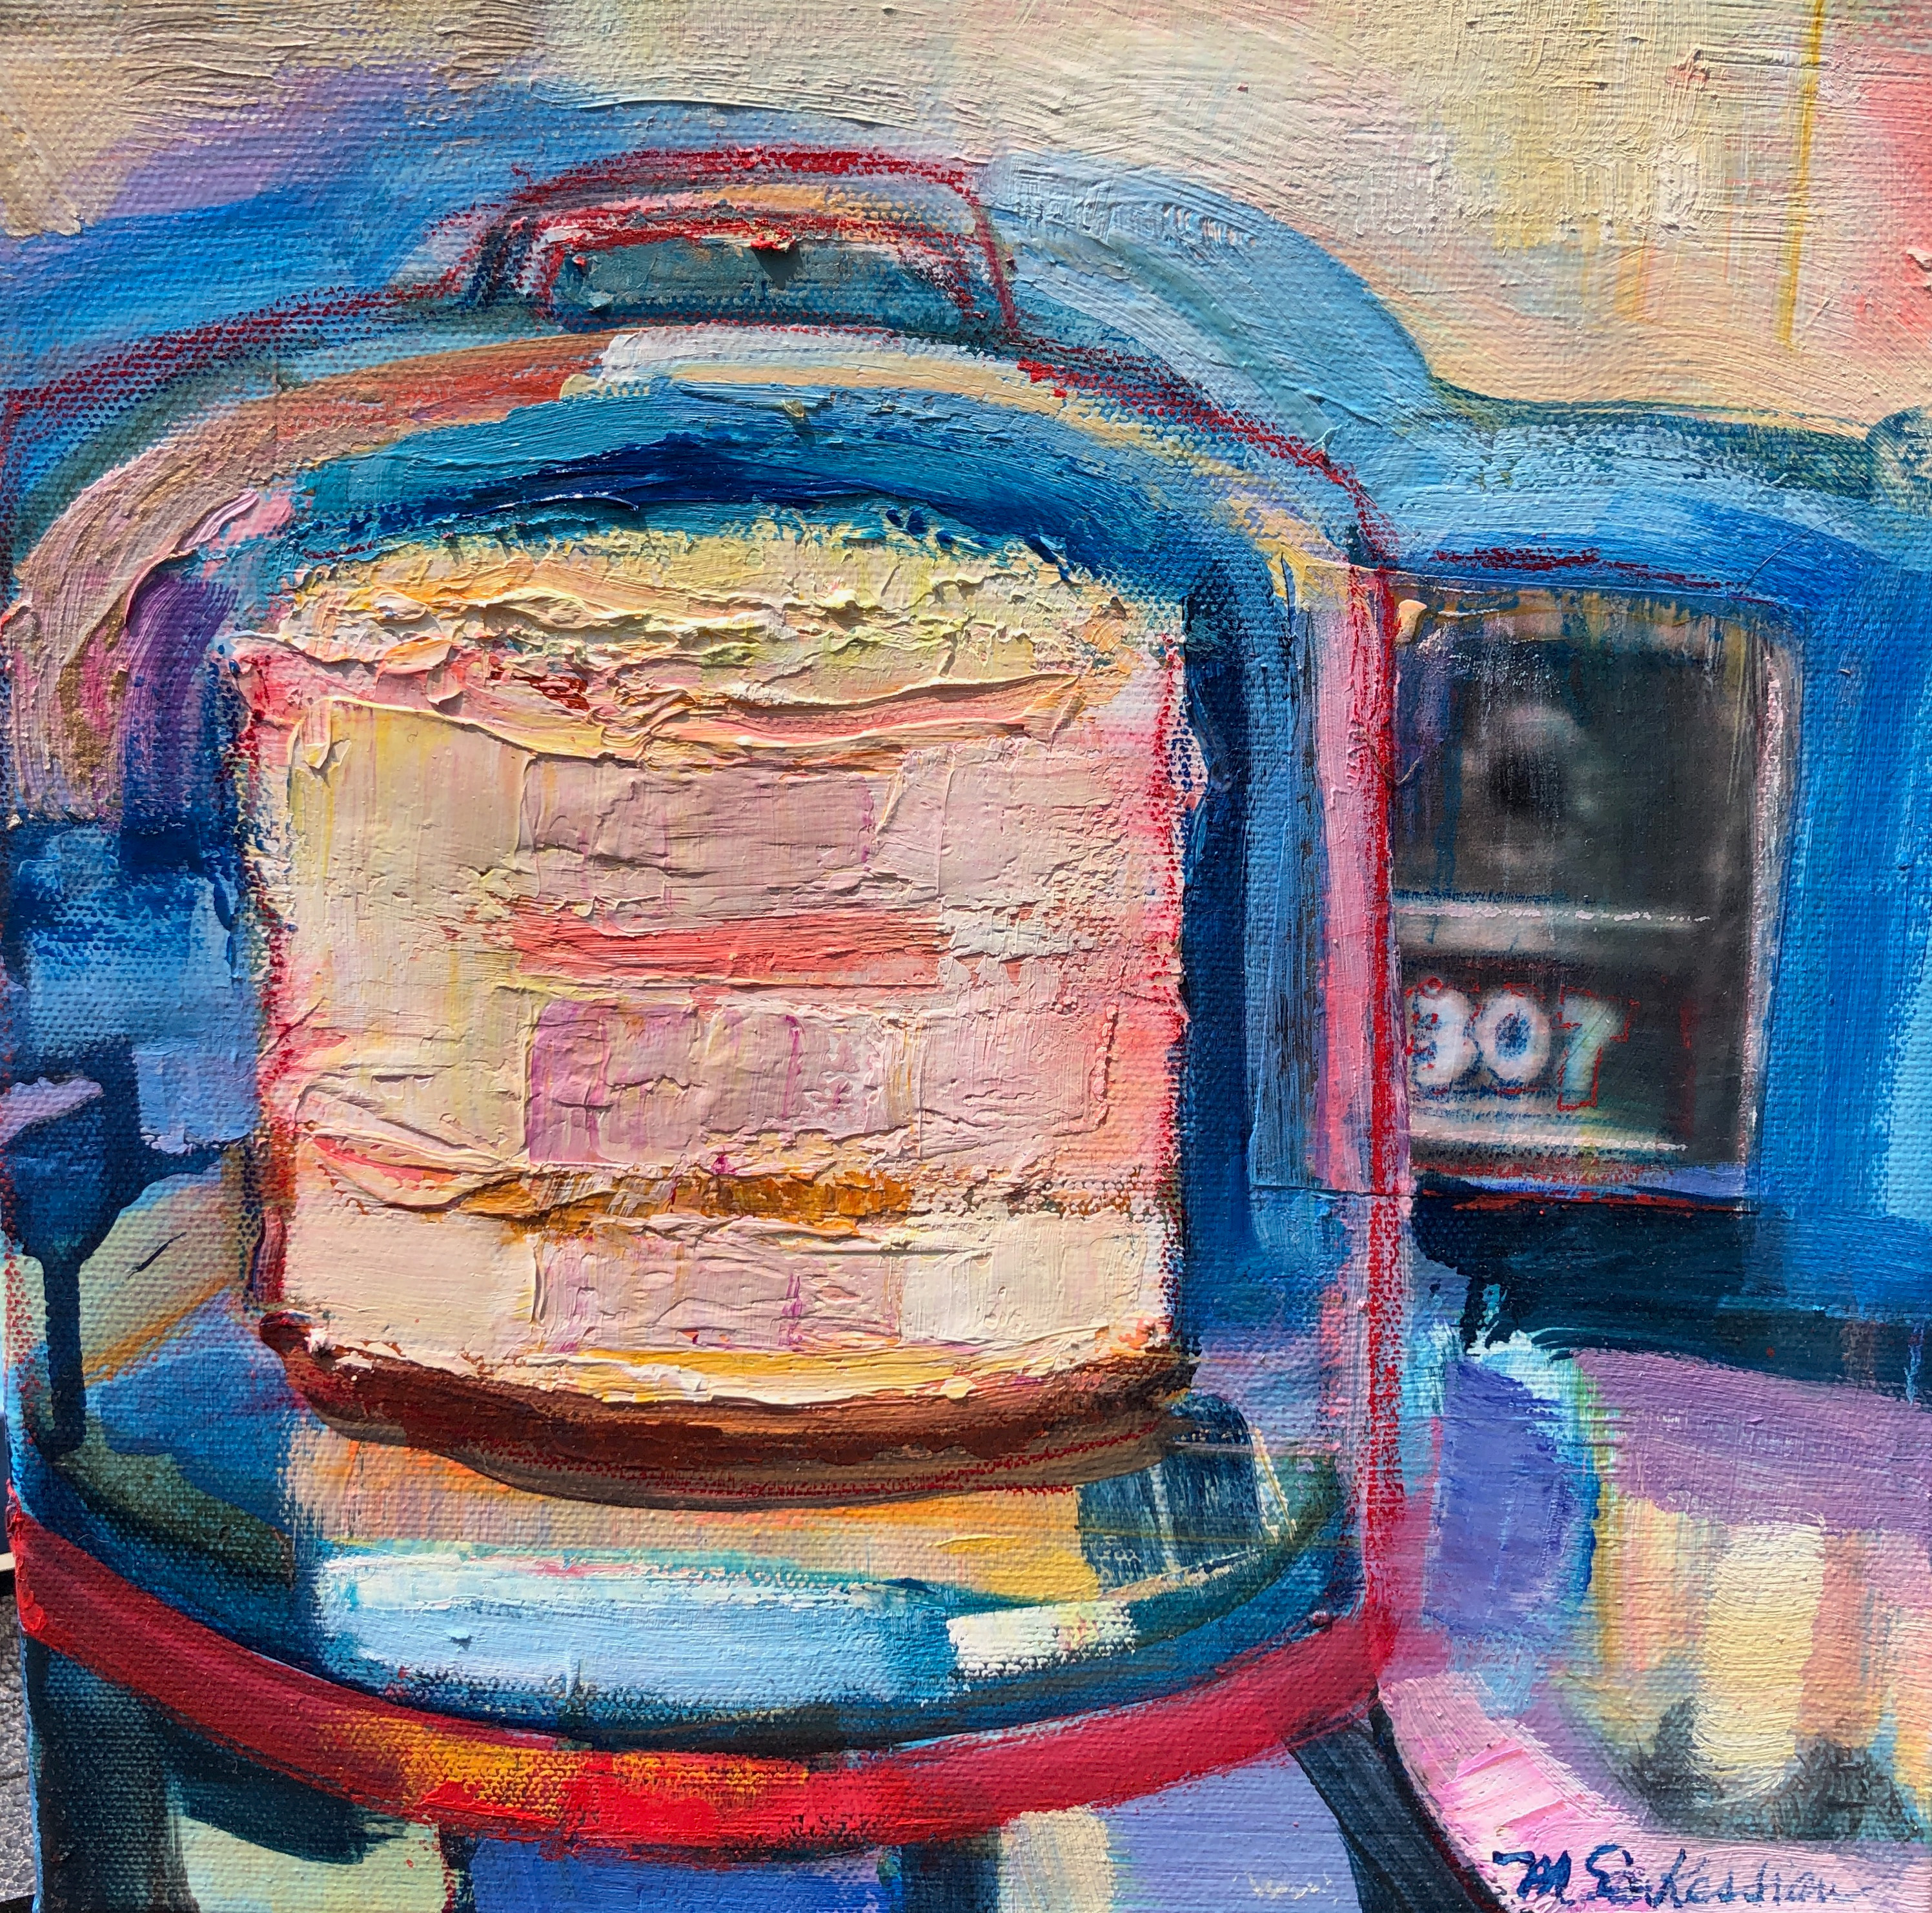 Times of refreshment 307 oil on canvas 10x10 cxcq93